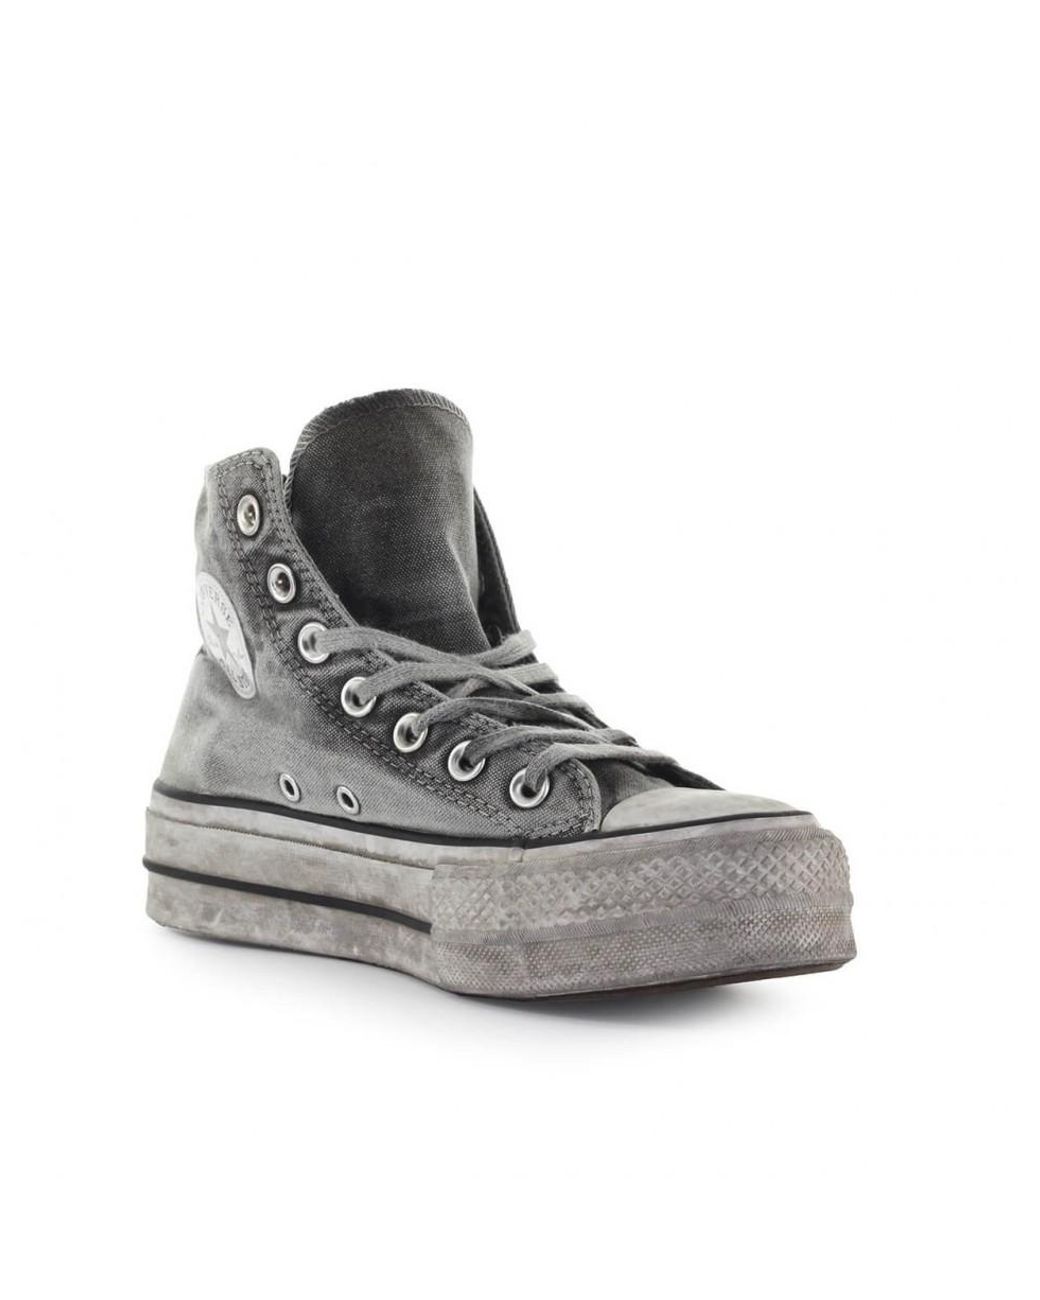 Converse All Star Chuck Taylor Smoked Grey Sneaker in Gray | Lyst